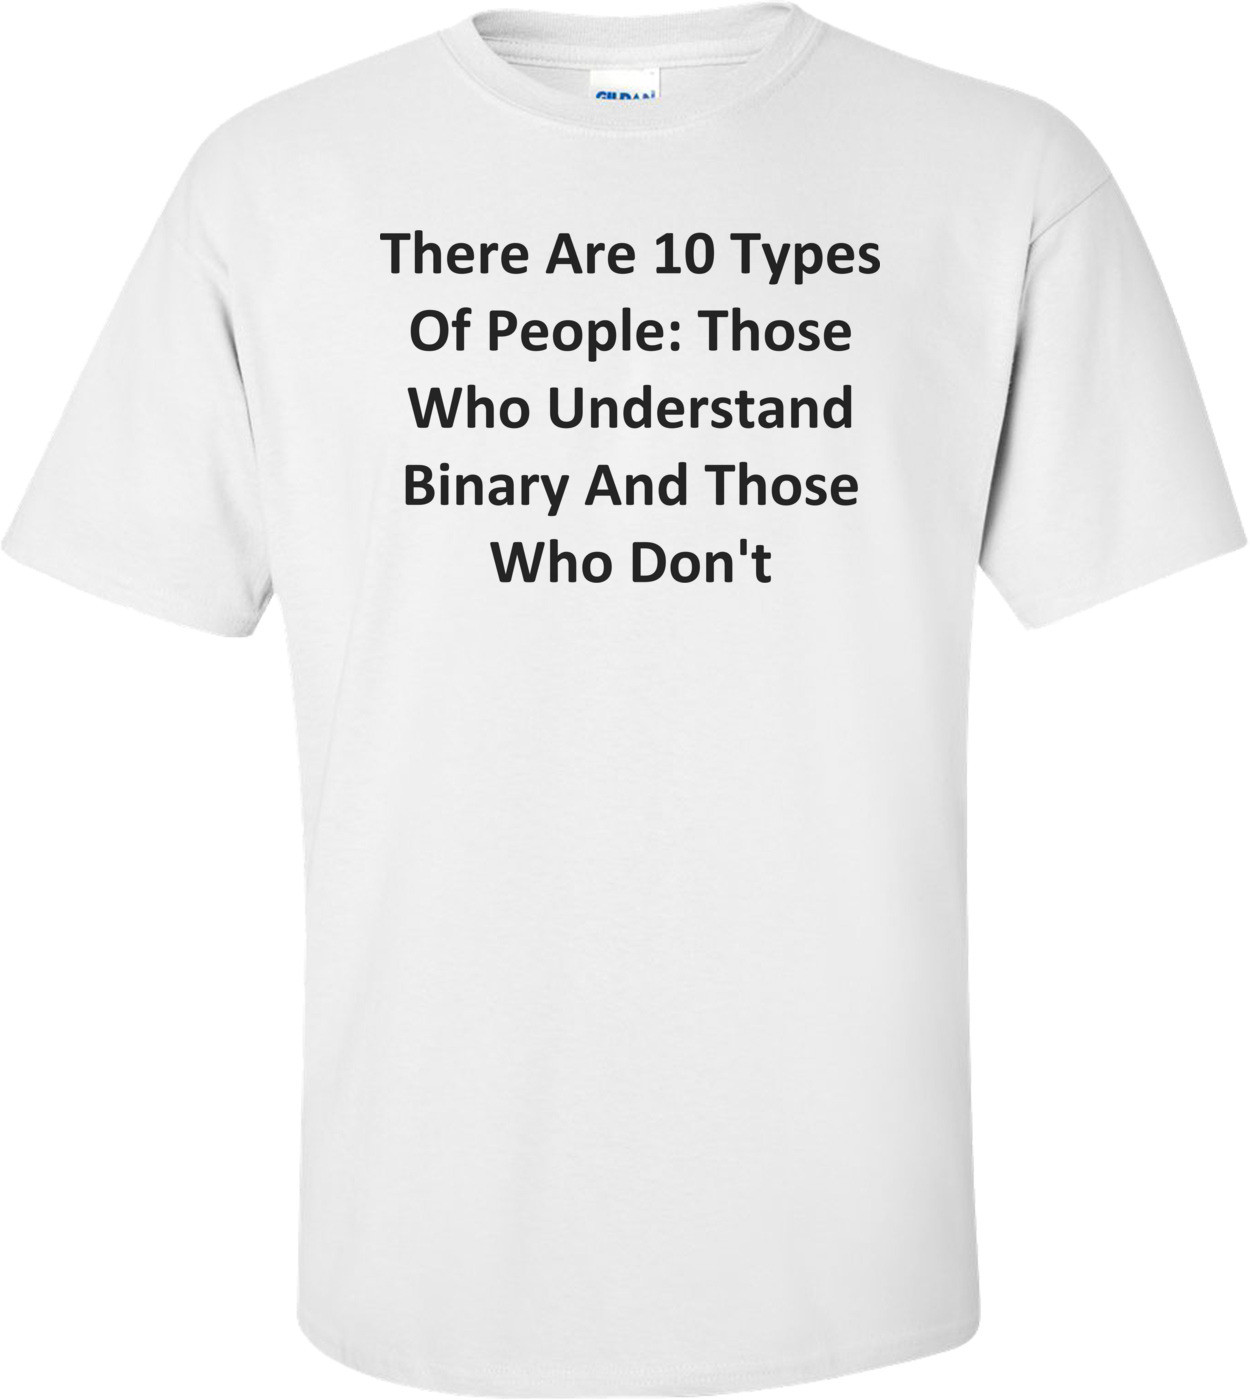 There Are 10 Types Of People: Those Who Understand Binary And Those Who Don't